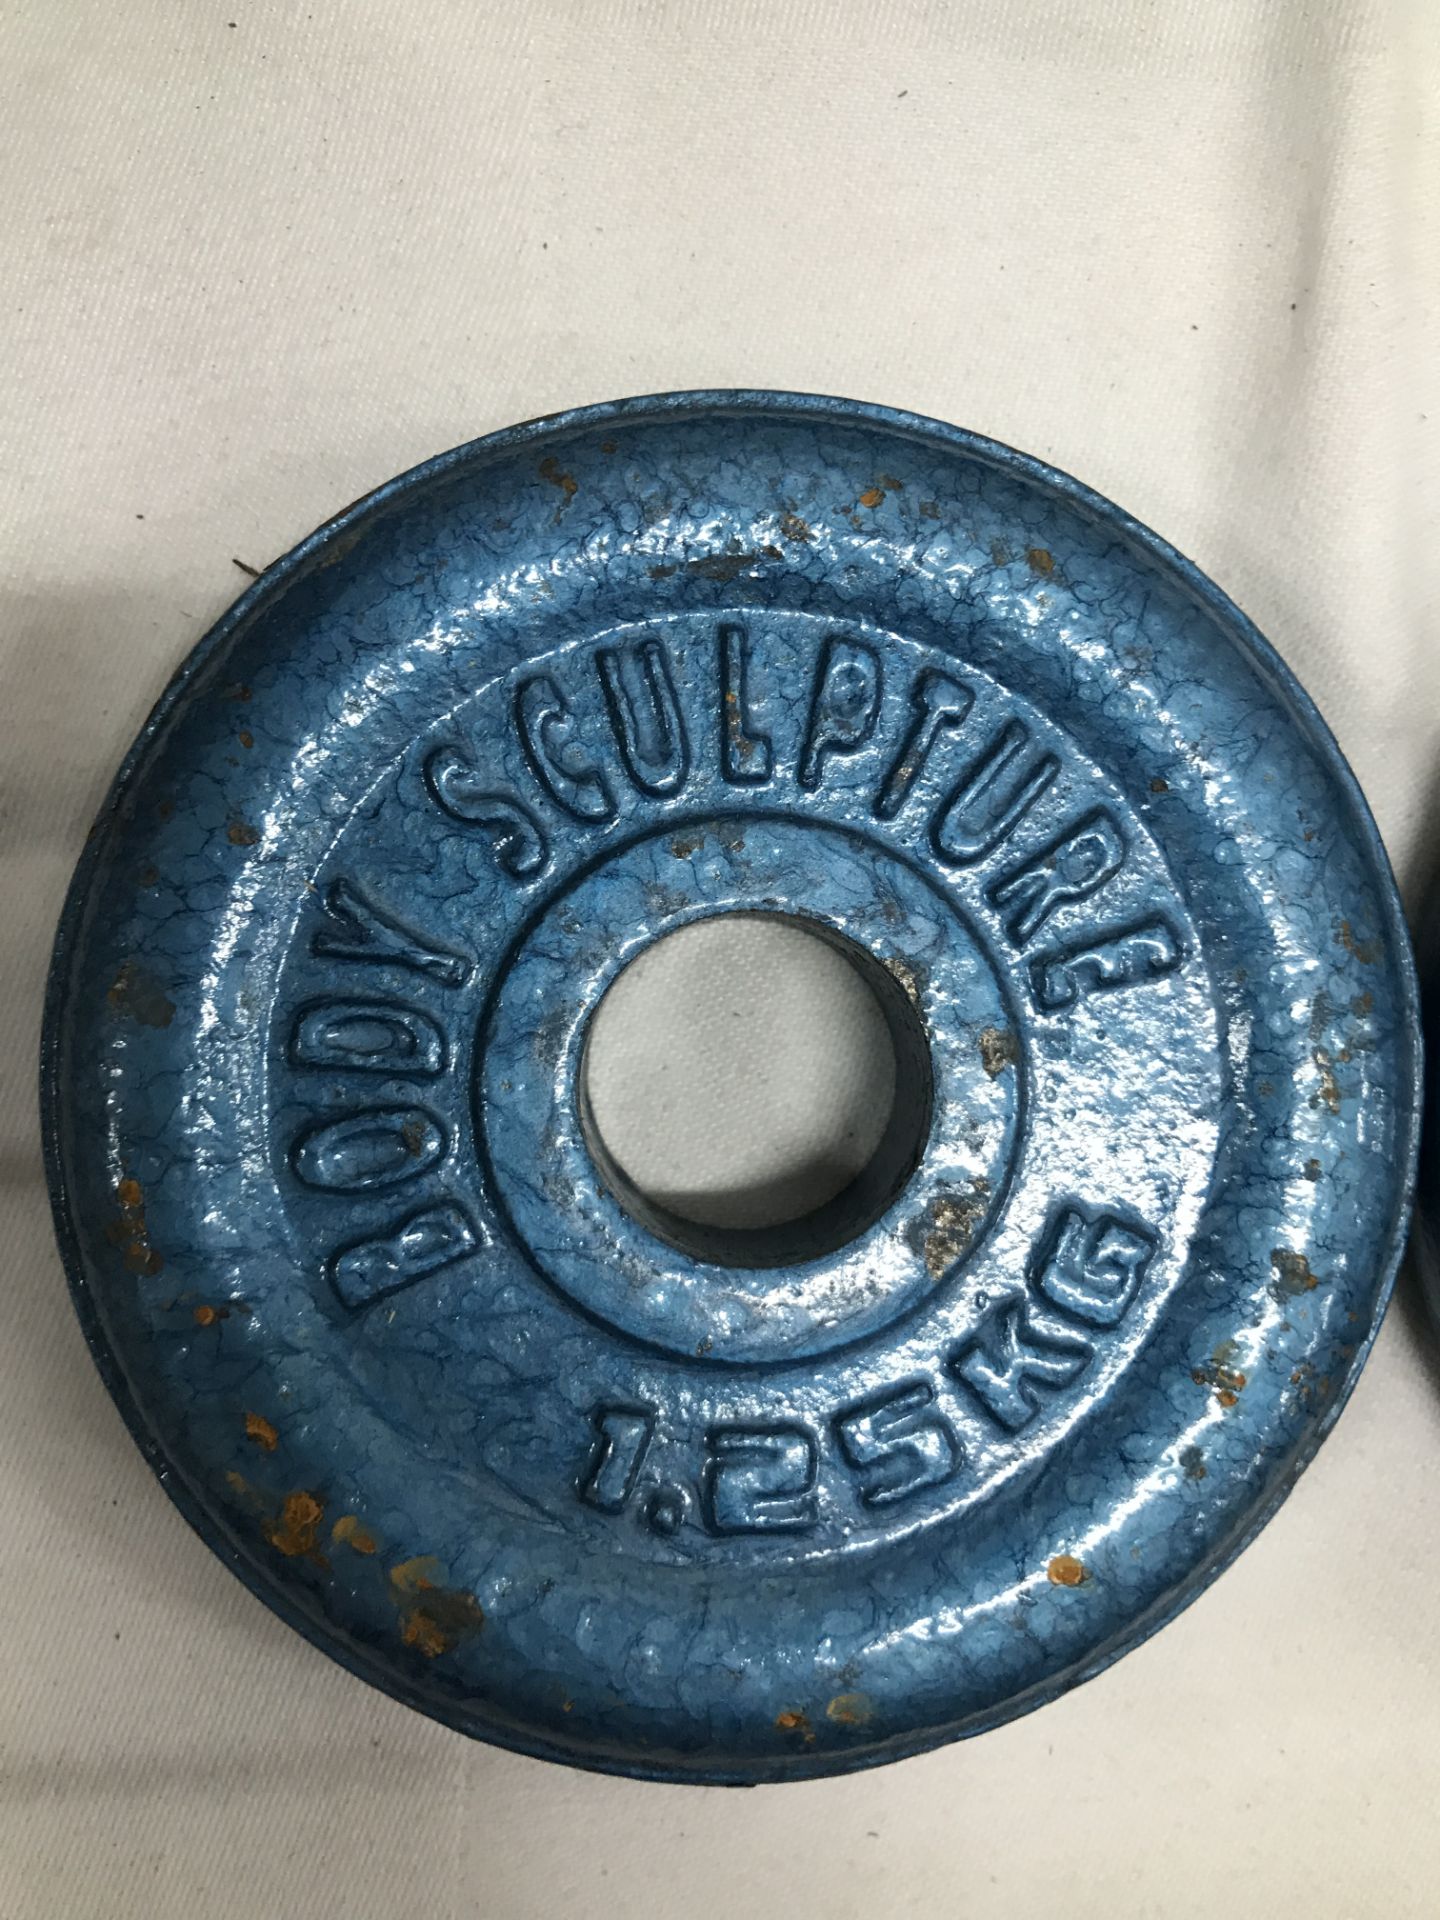 22 x Body Sculpture Weights - Image 3 of 5